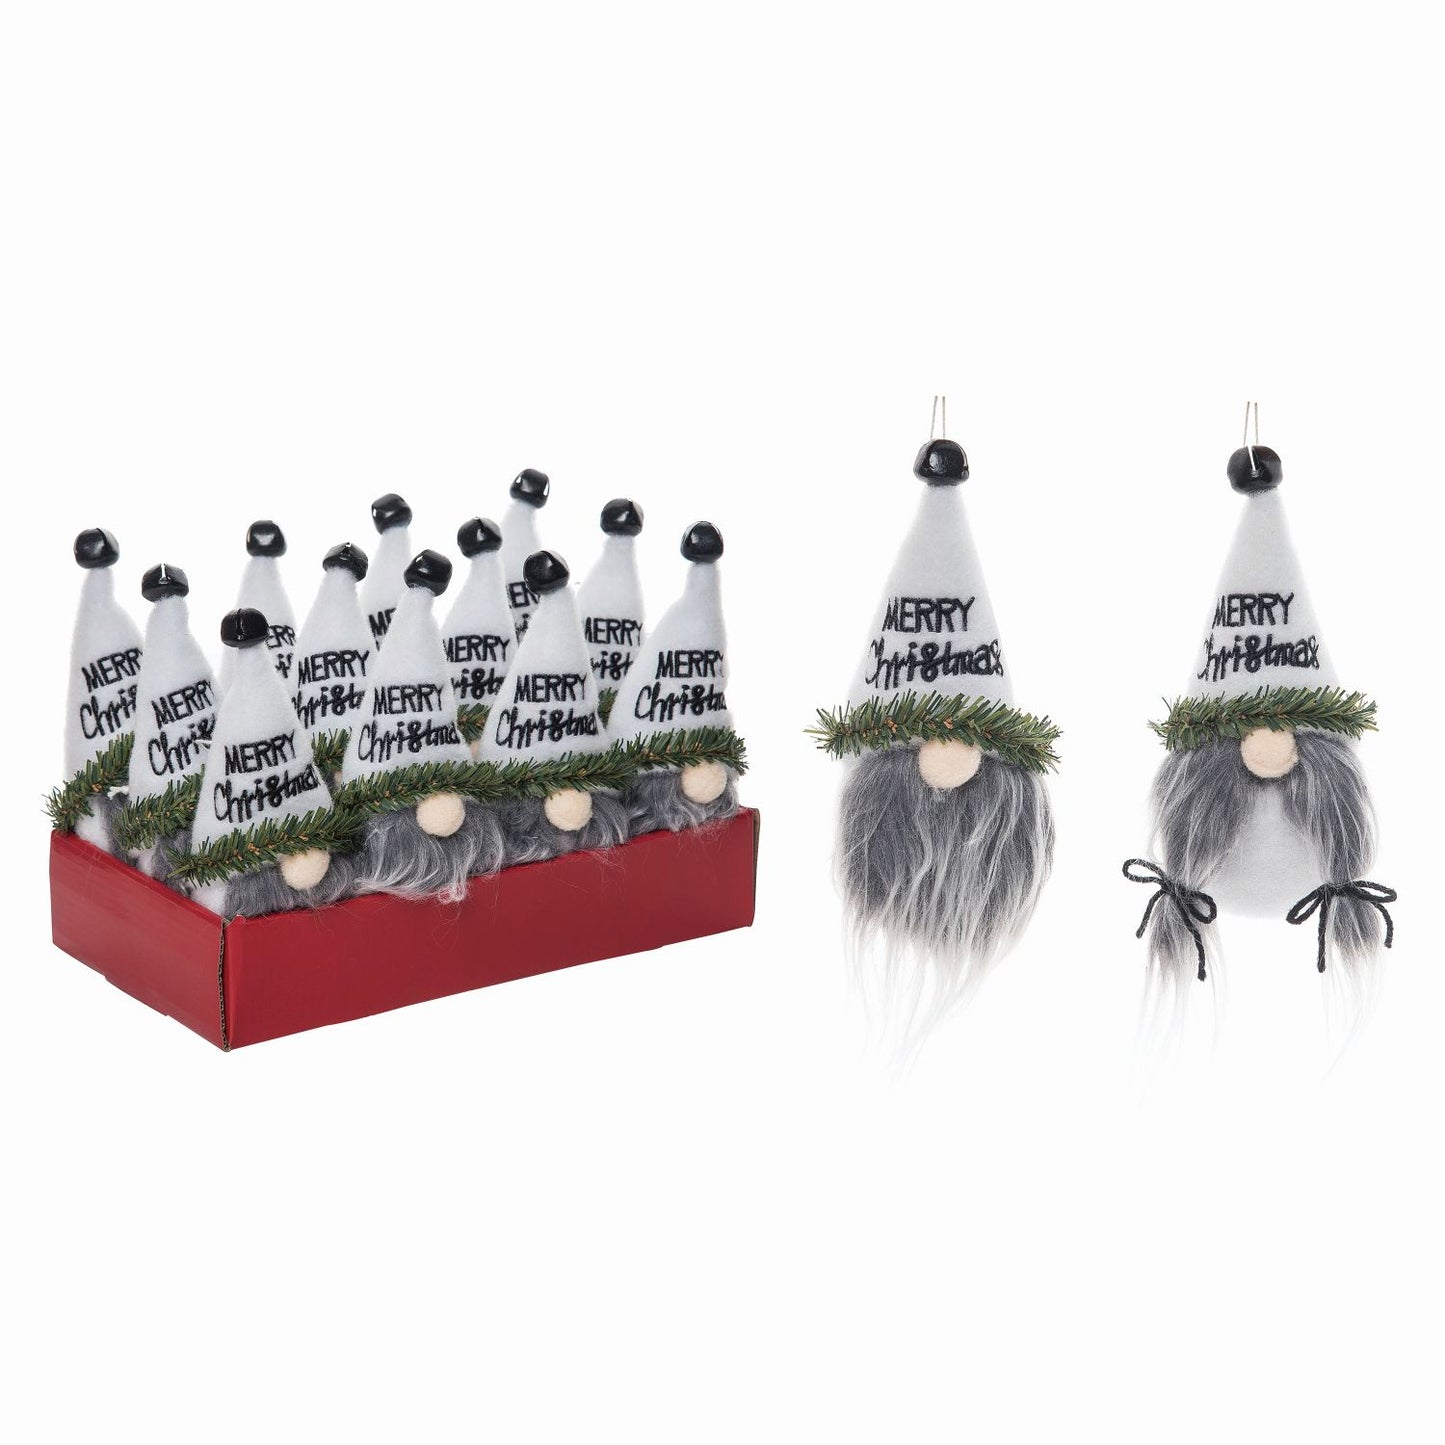 Transpac Plush Country Christmas Ornaments In Display, Set Of 12